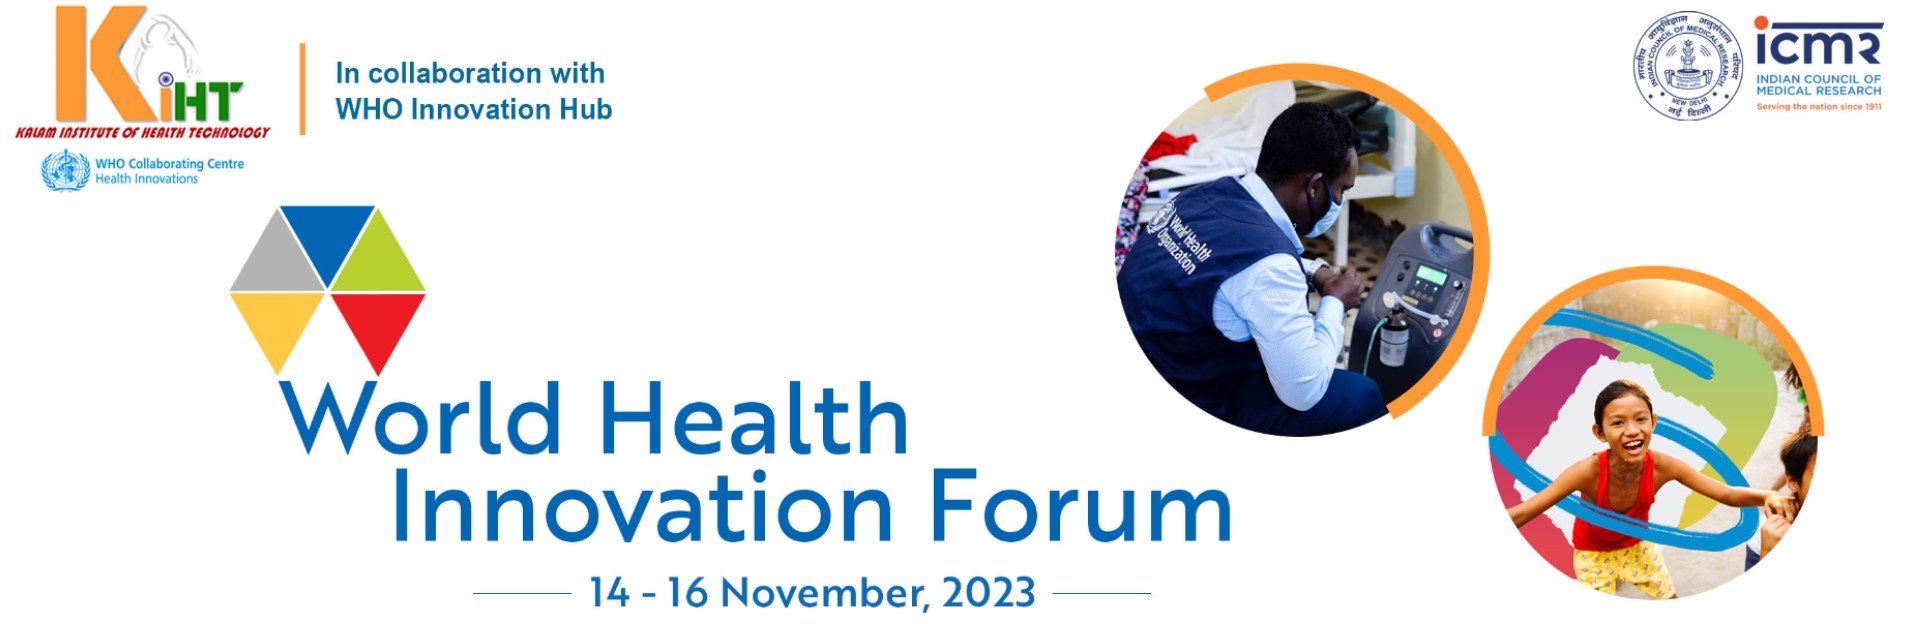 World Health Innovation Forum 2023: Scaling grassroots innovations for sustainable NCD responses